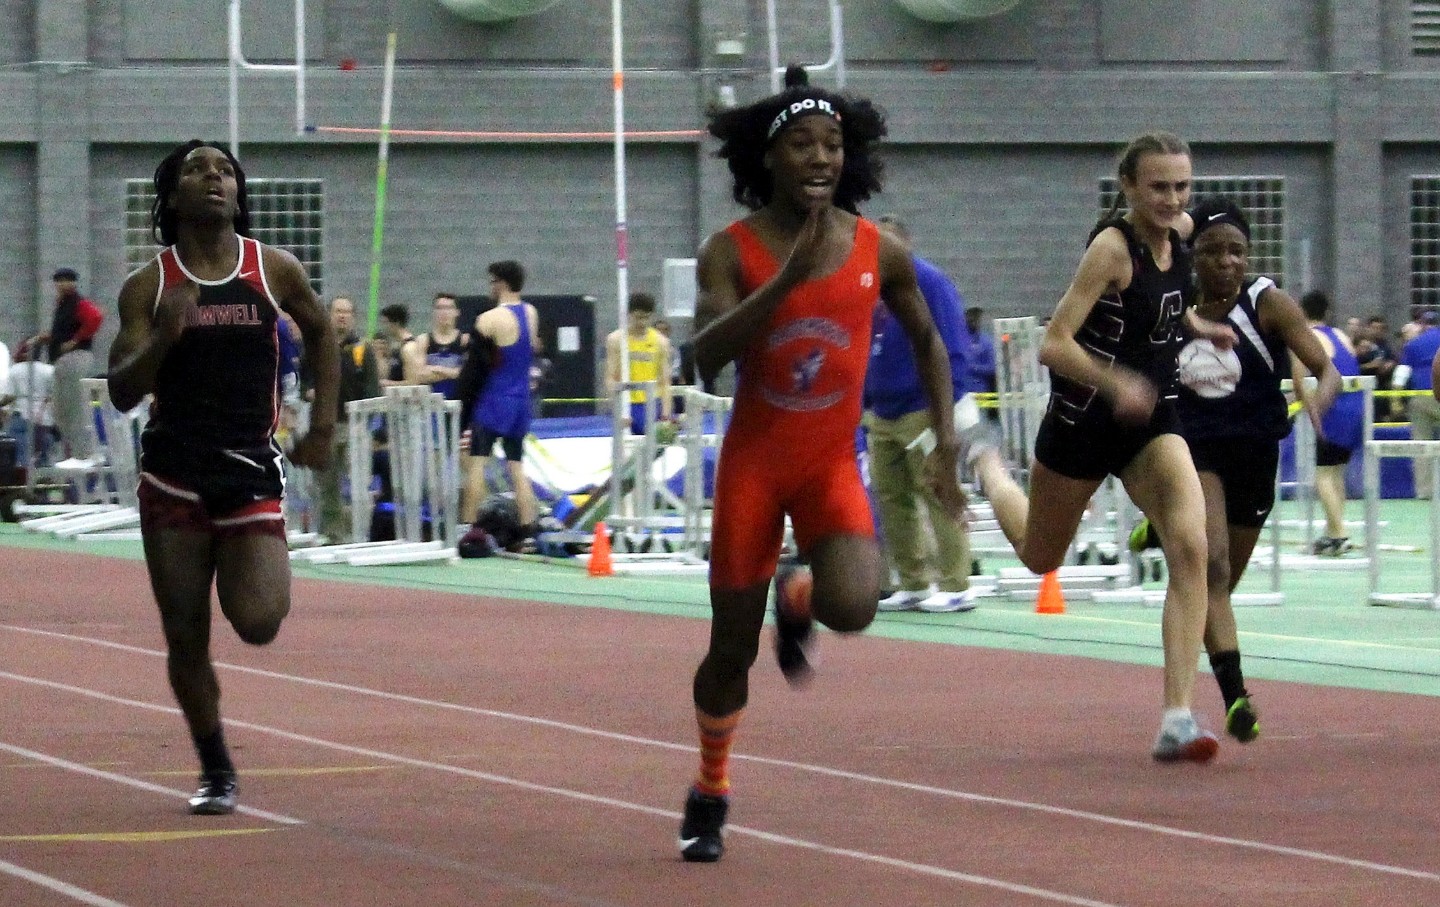 Bloomfield High School athletes Terry Miller, second from left, and Andraya Yearwood, far left, compete in the 55-meter dash at the Connecticut girls Class S indoor track meet in New Haven, Connecticut, February 2019.